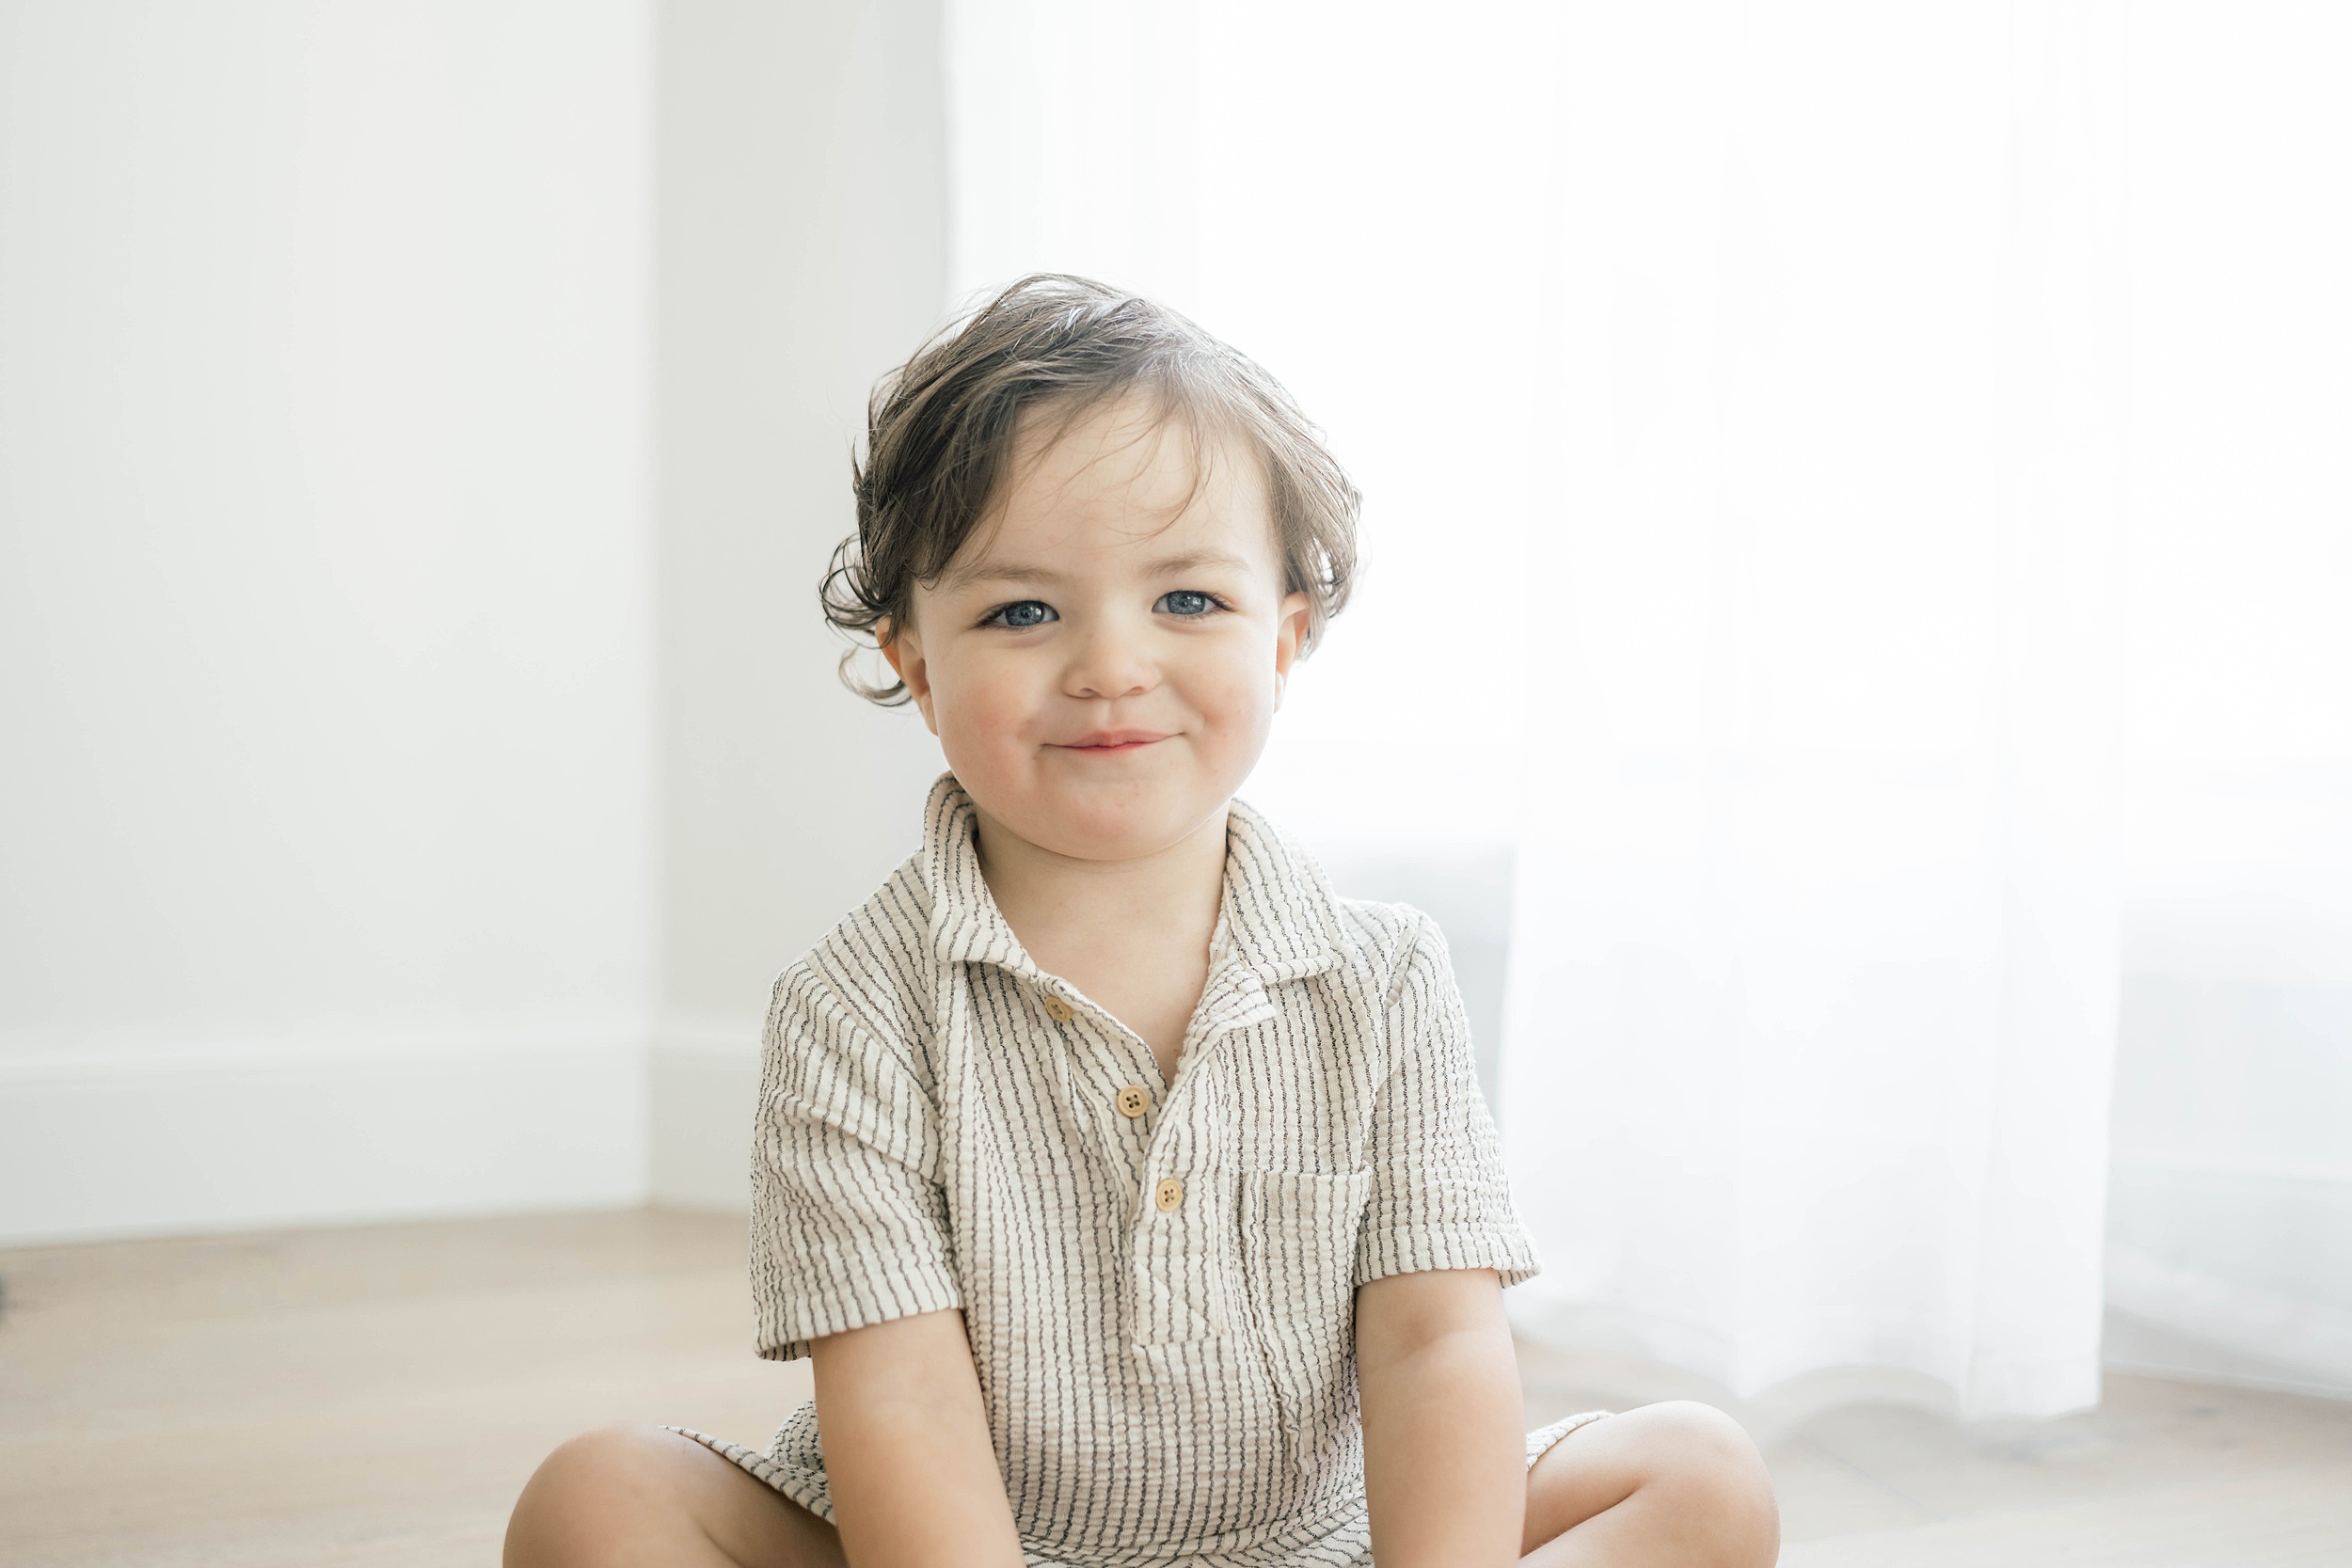 A young toddler in a striped shirt sits on a studio floor by a window smiling